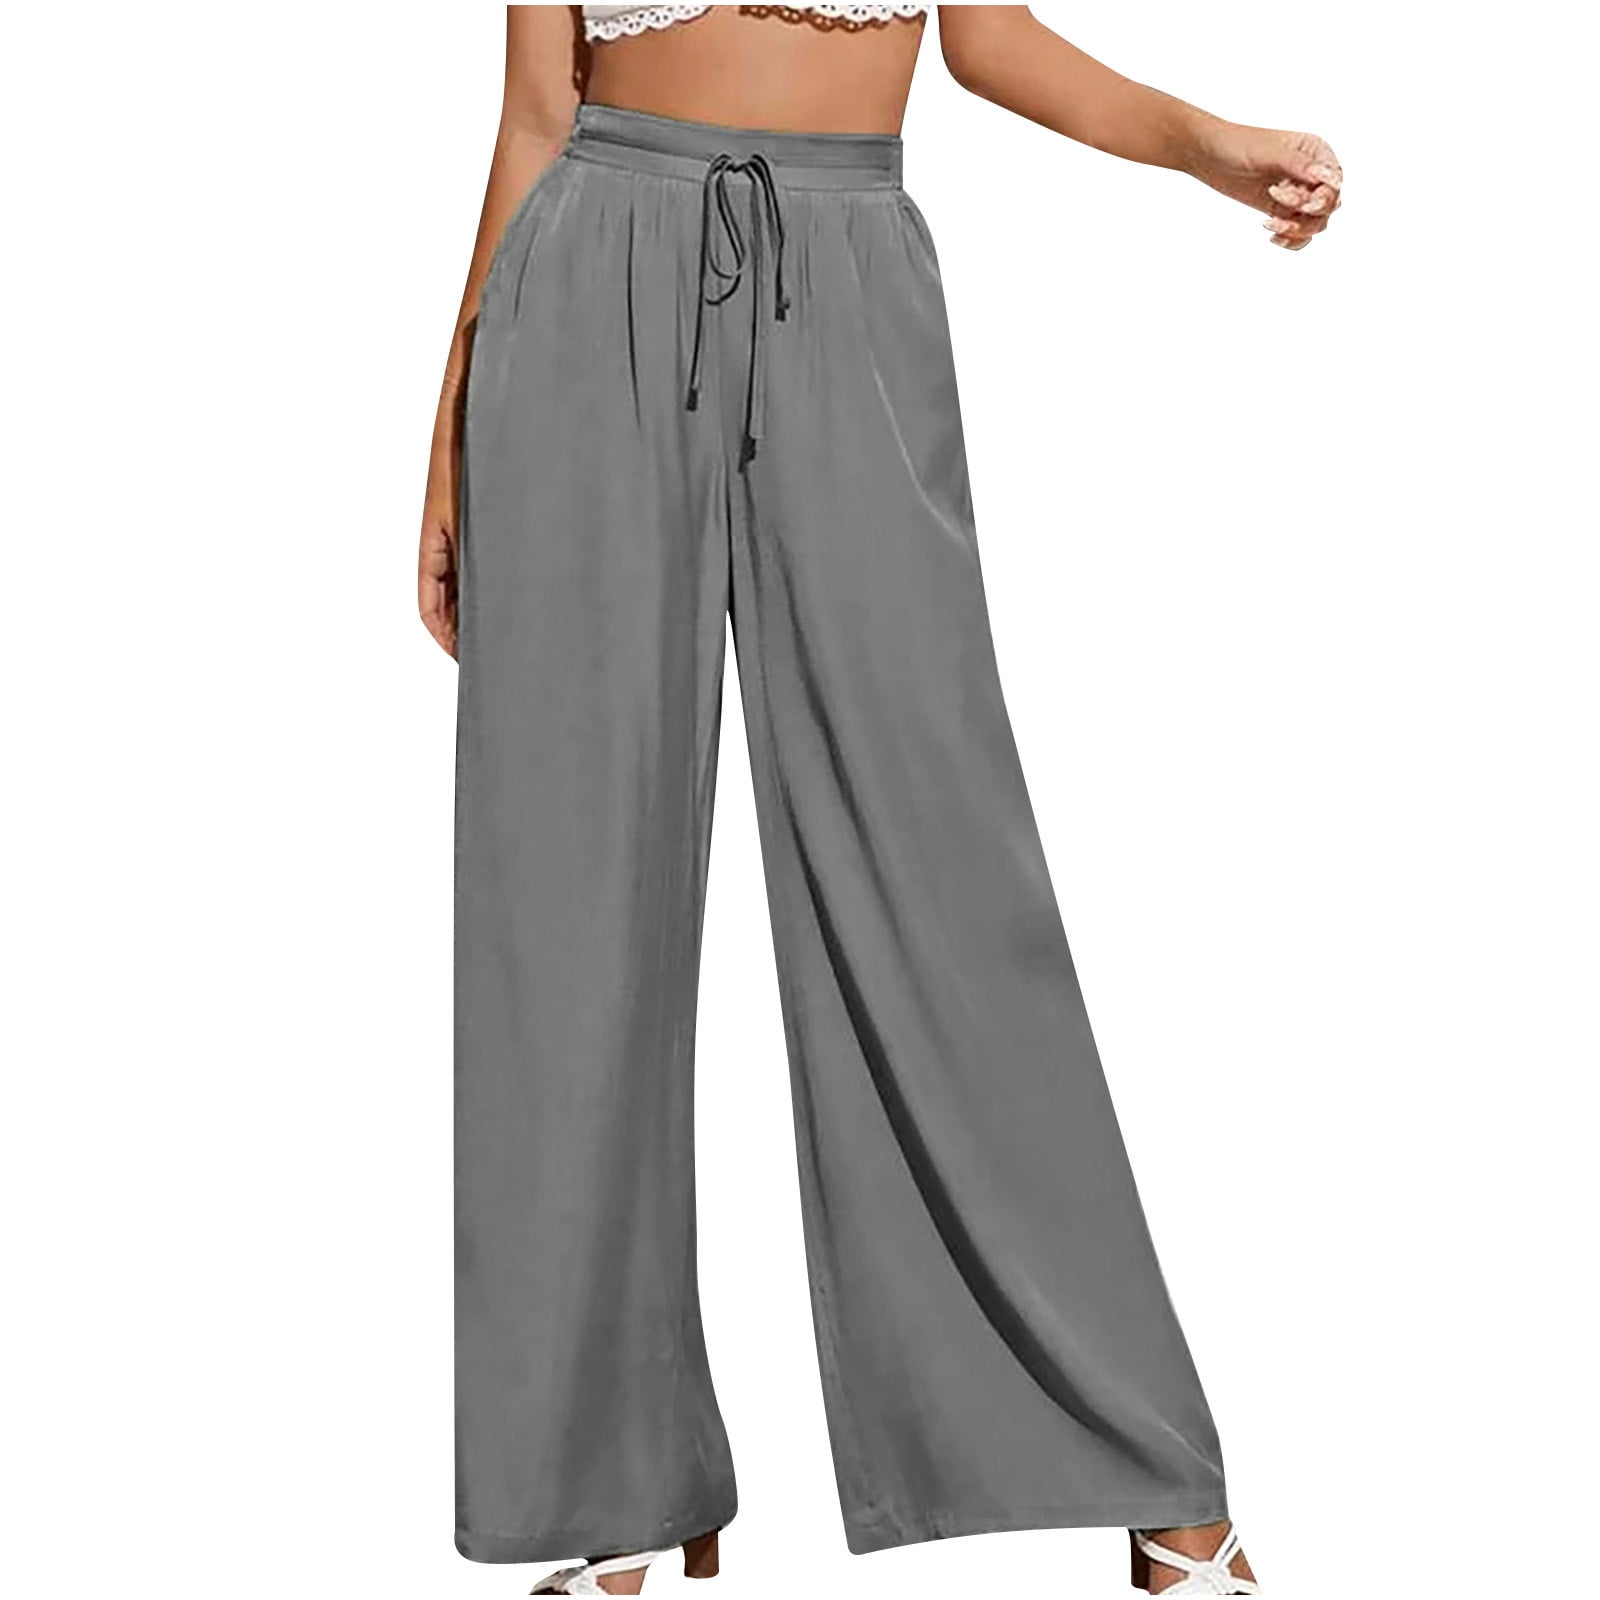 Mrat Full Length Pants Women Athletic Pants Fashion Ladies Summer Casual  Loose Pocket Solid Trousers Wide Leg Pants Female Pull-On Stretch Pant